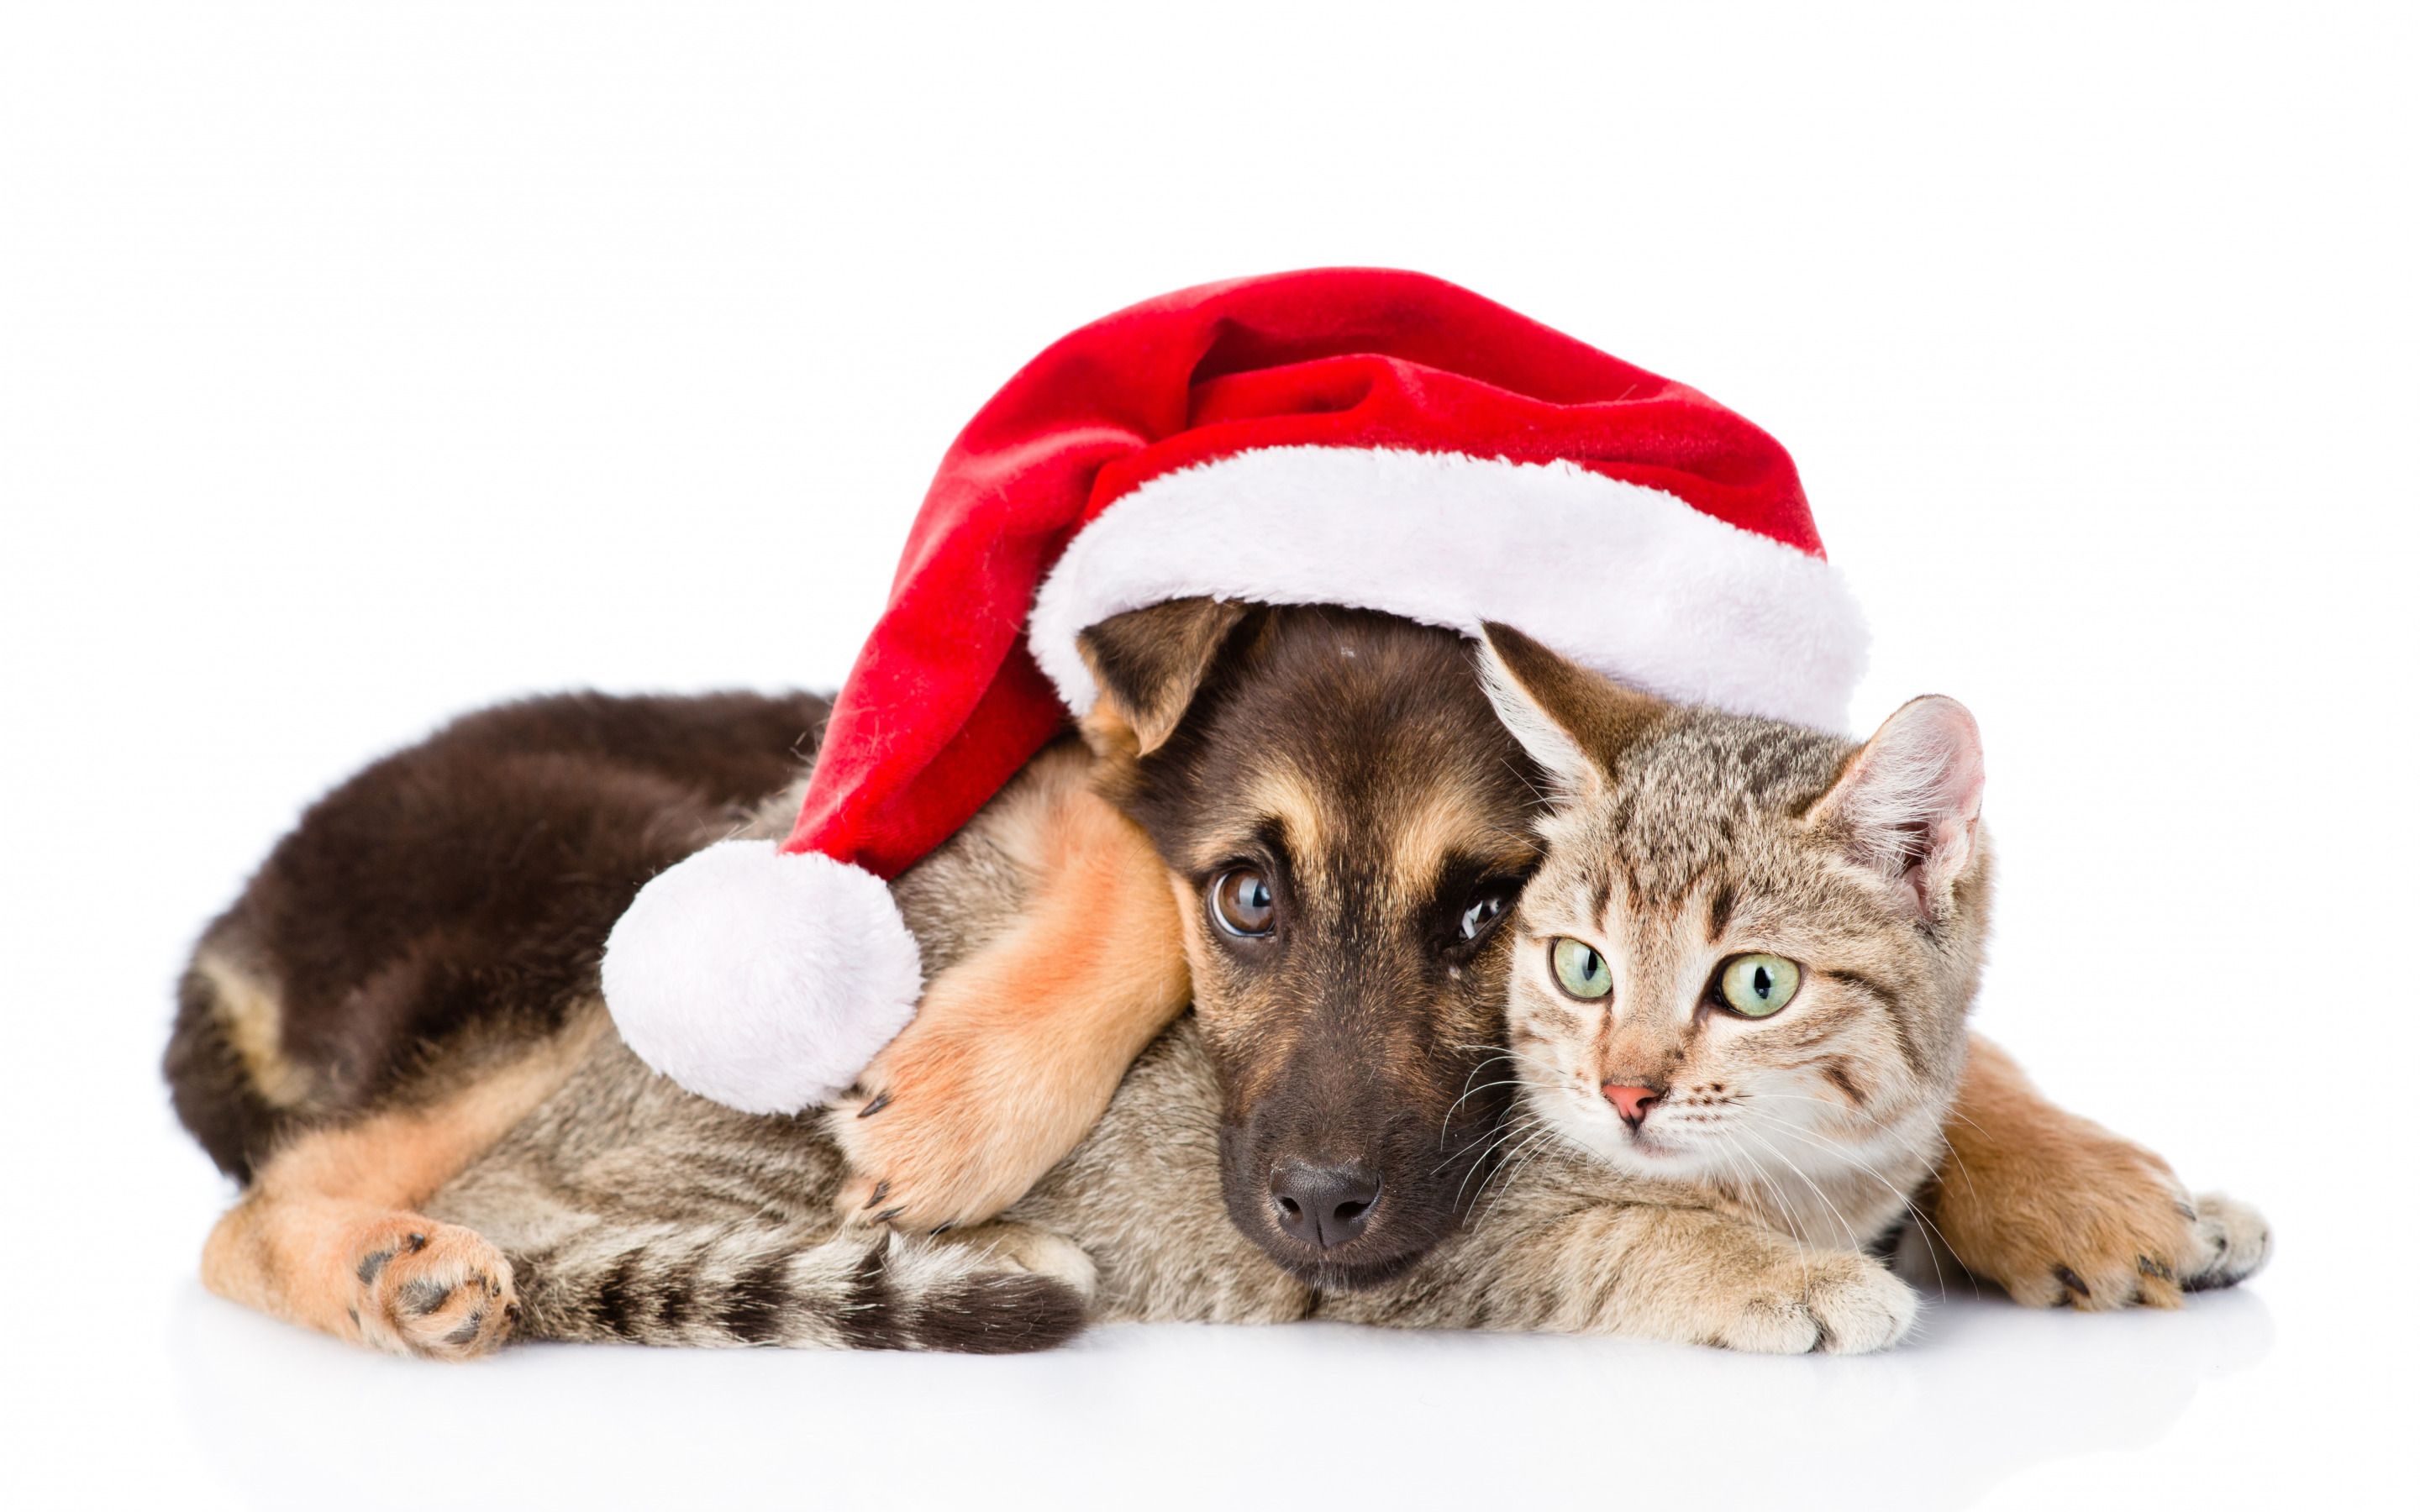 Download wallpaper little german shepherd, puppy and kitten, christmas, friends, cat and dog, cute animals, pets, cats, dogs for desktop with resolution 2880x1800. High Quality HD picture wallpaper